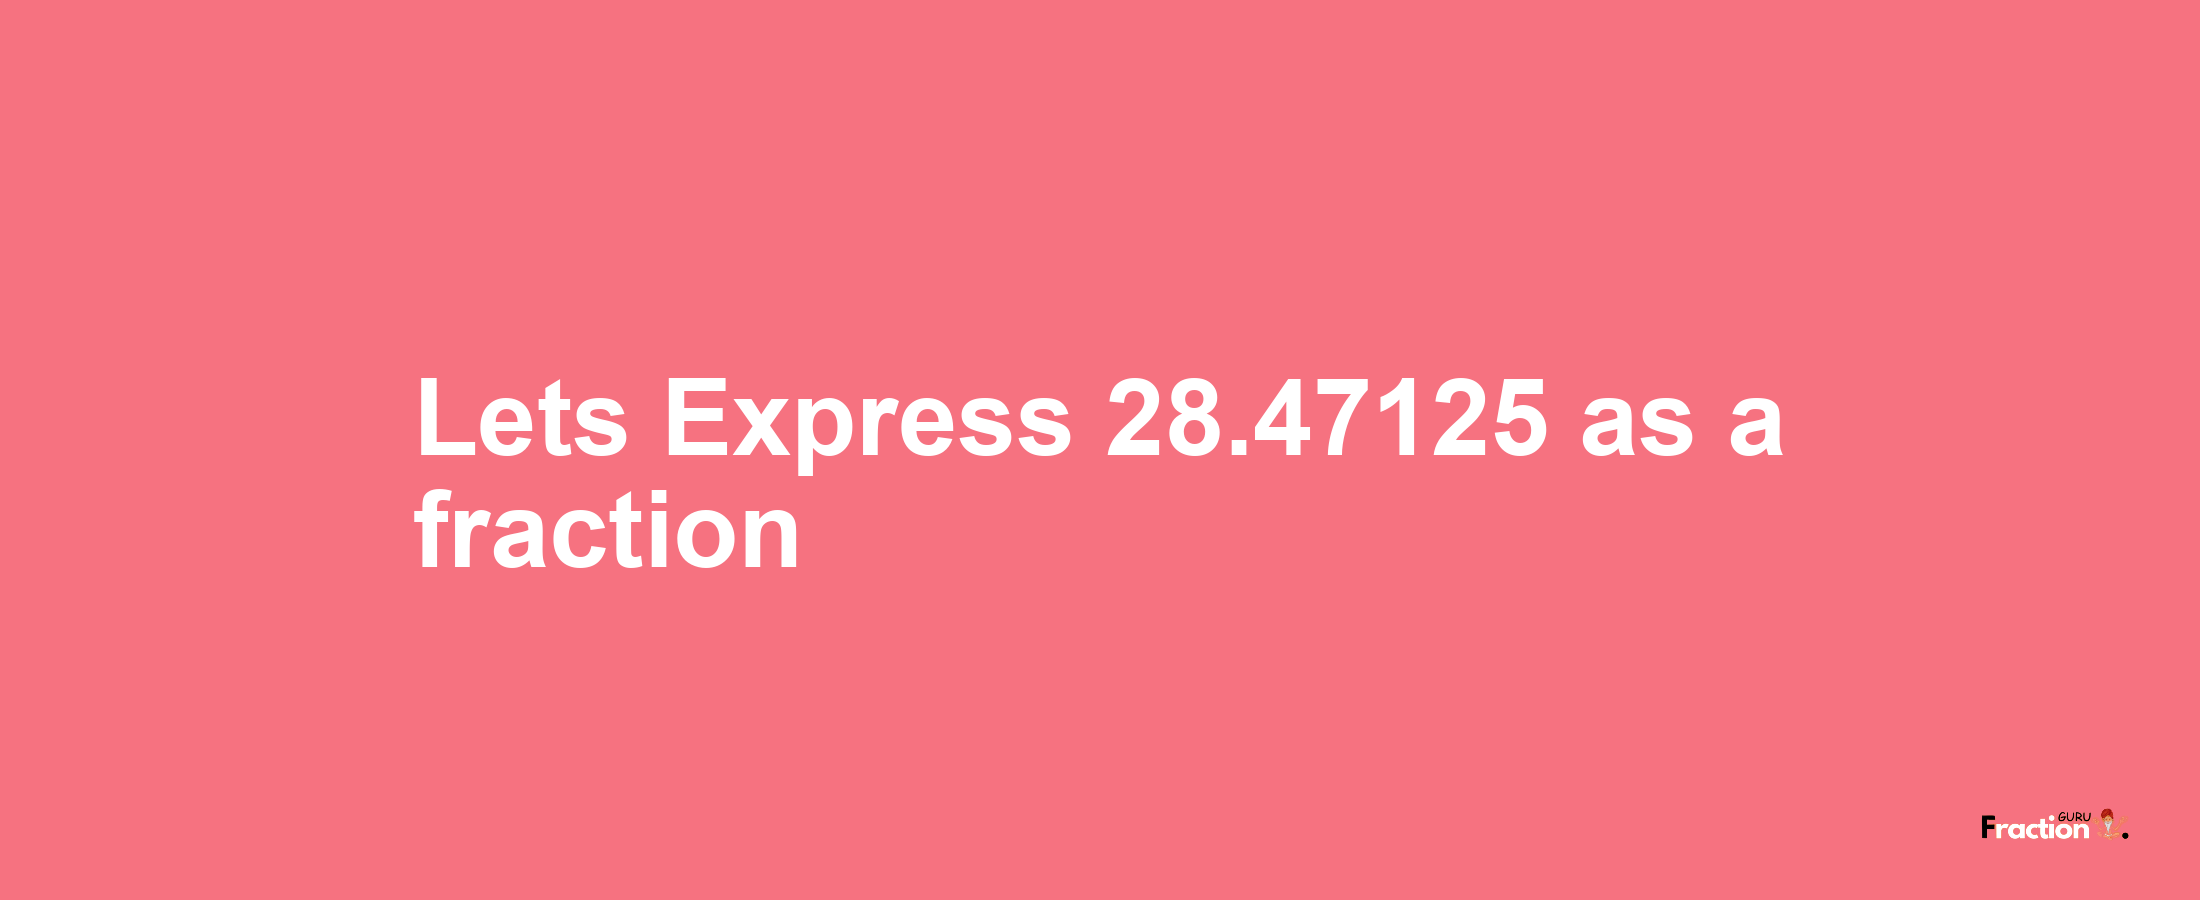 Lets Express 28.47125 as afraction